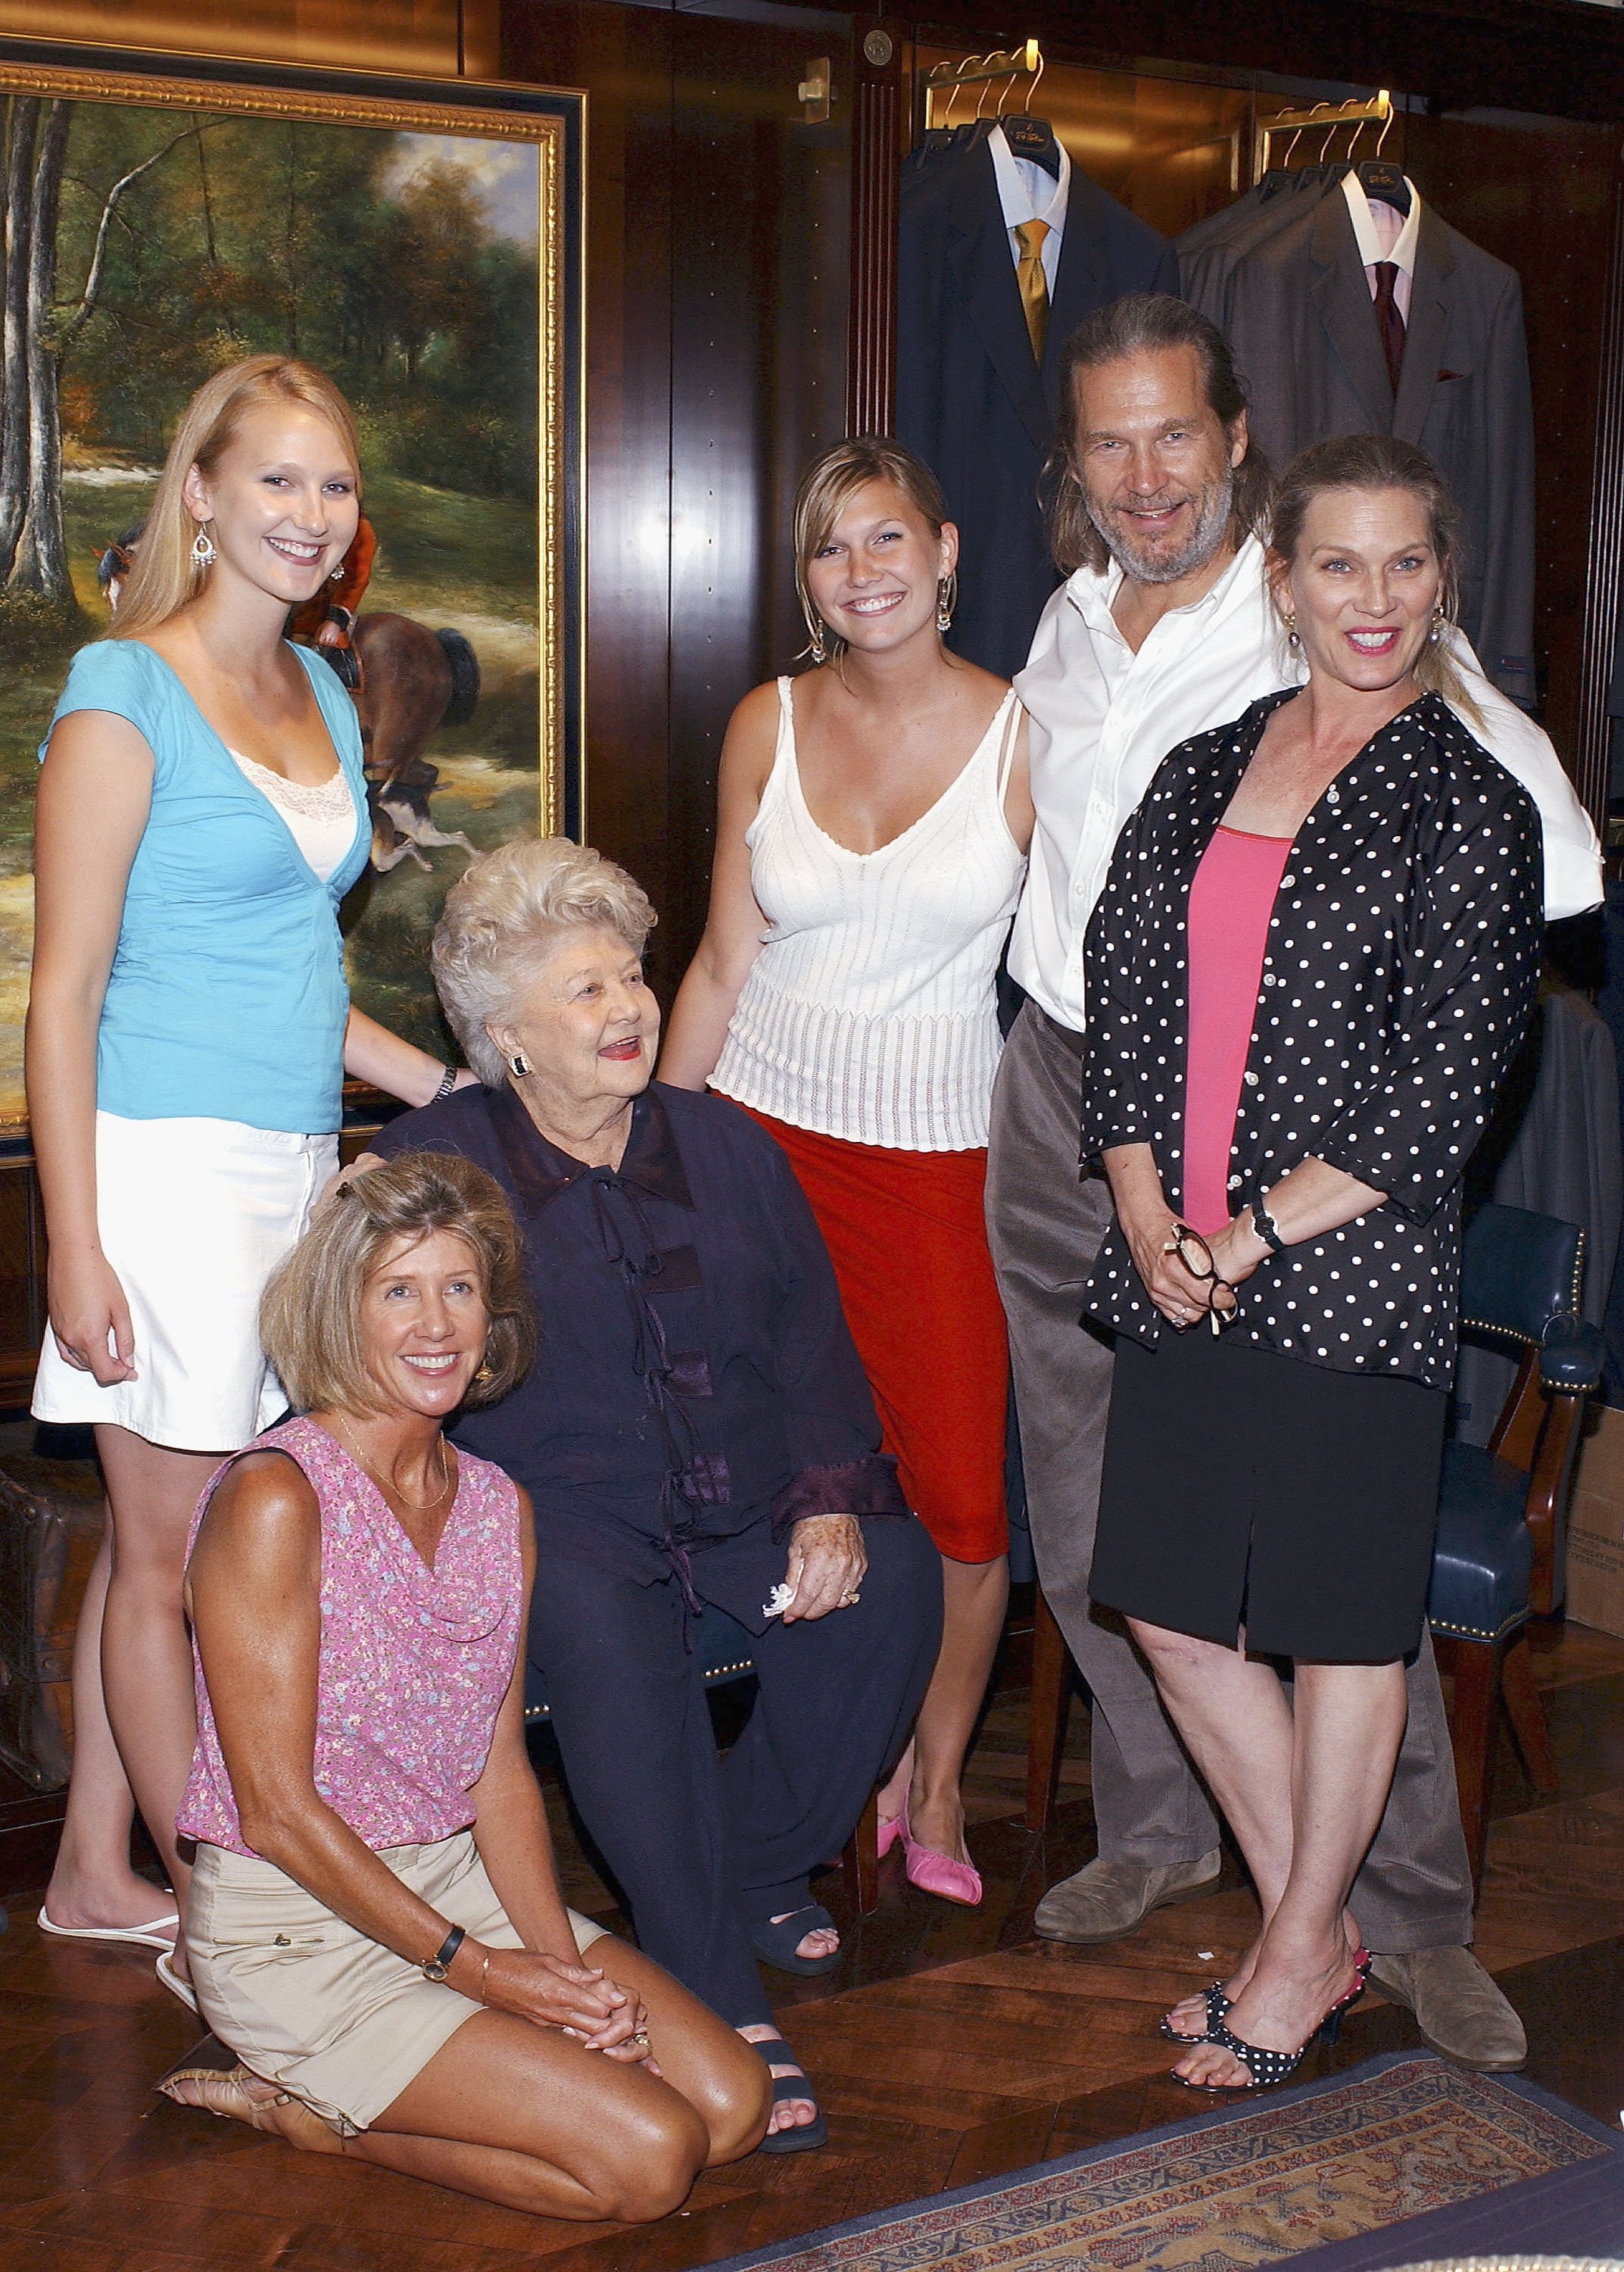 Hayley, Cindy, mother Dorothy, Jessica and wife Susan attend a cocktail party celebrating the launch of Bridges' new book of photographs entitled "Pictures" on September 9, 2004 at Brooks Brothers in Beverly Hills, California. | Source: Amanda Edwards/Getty Images